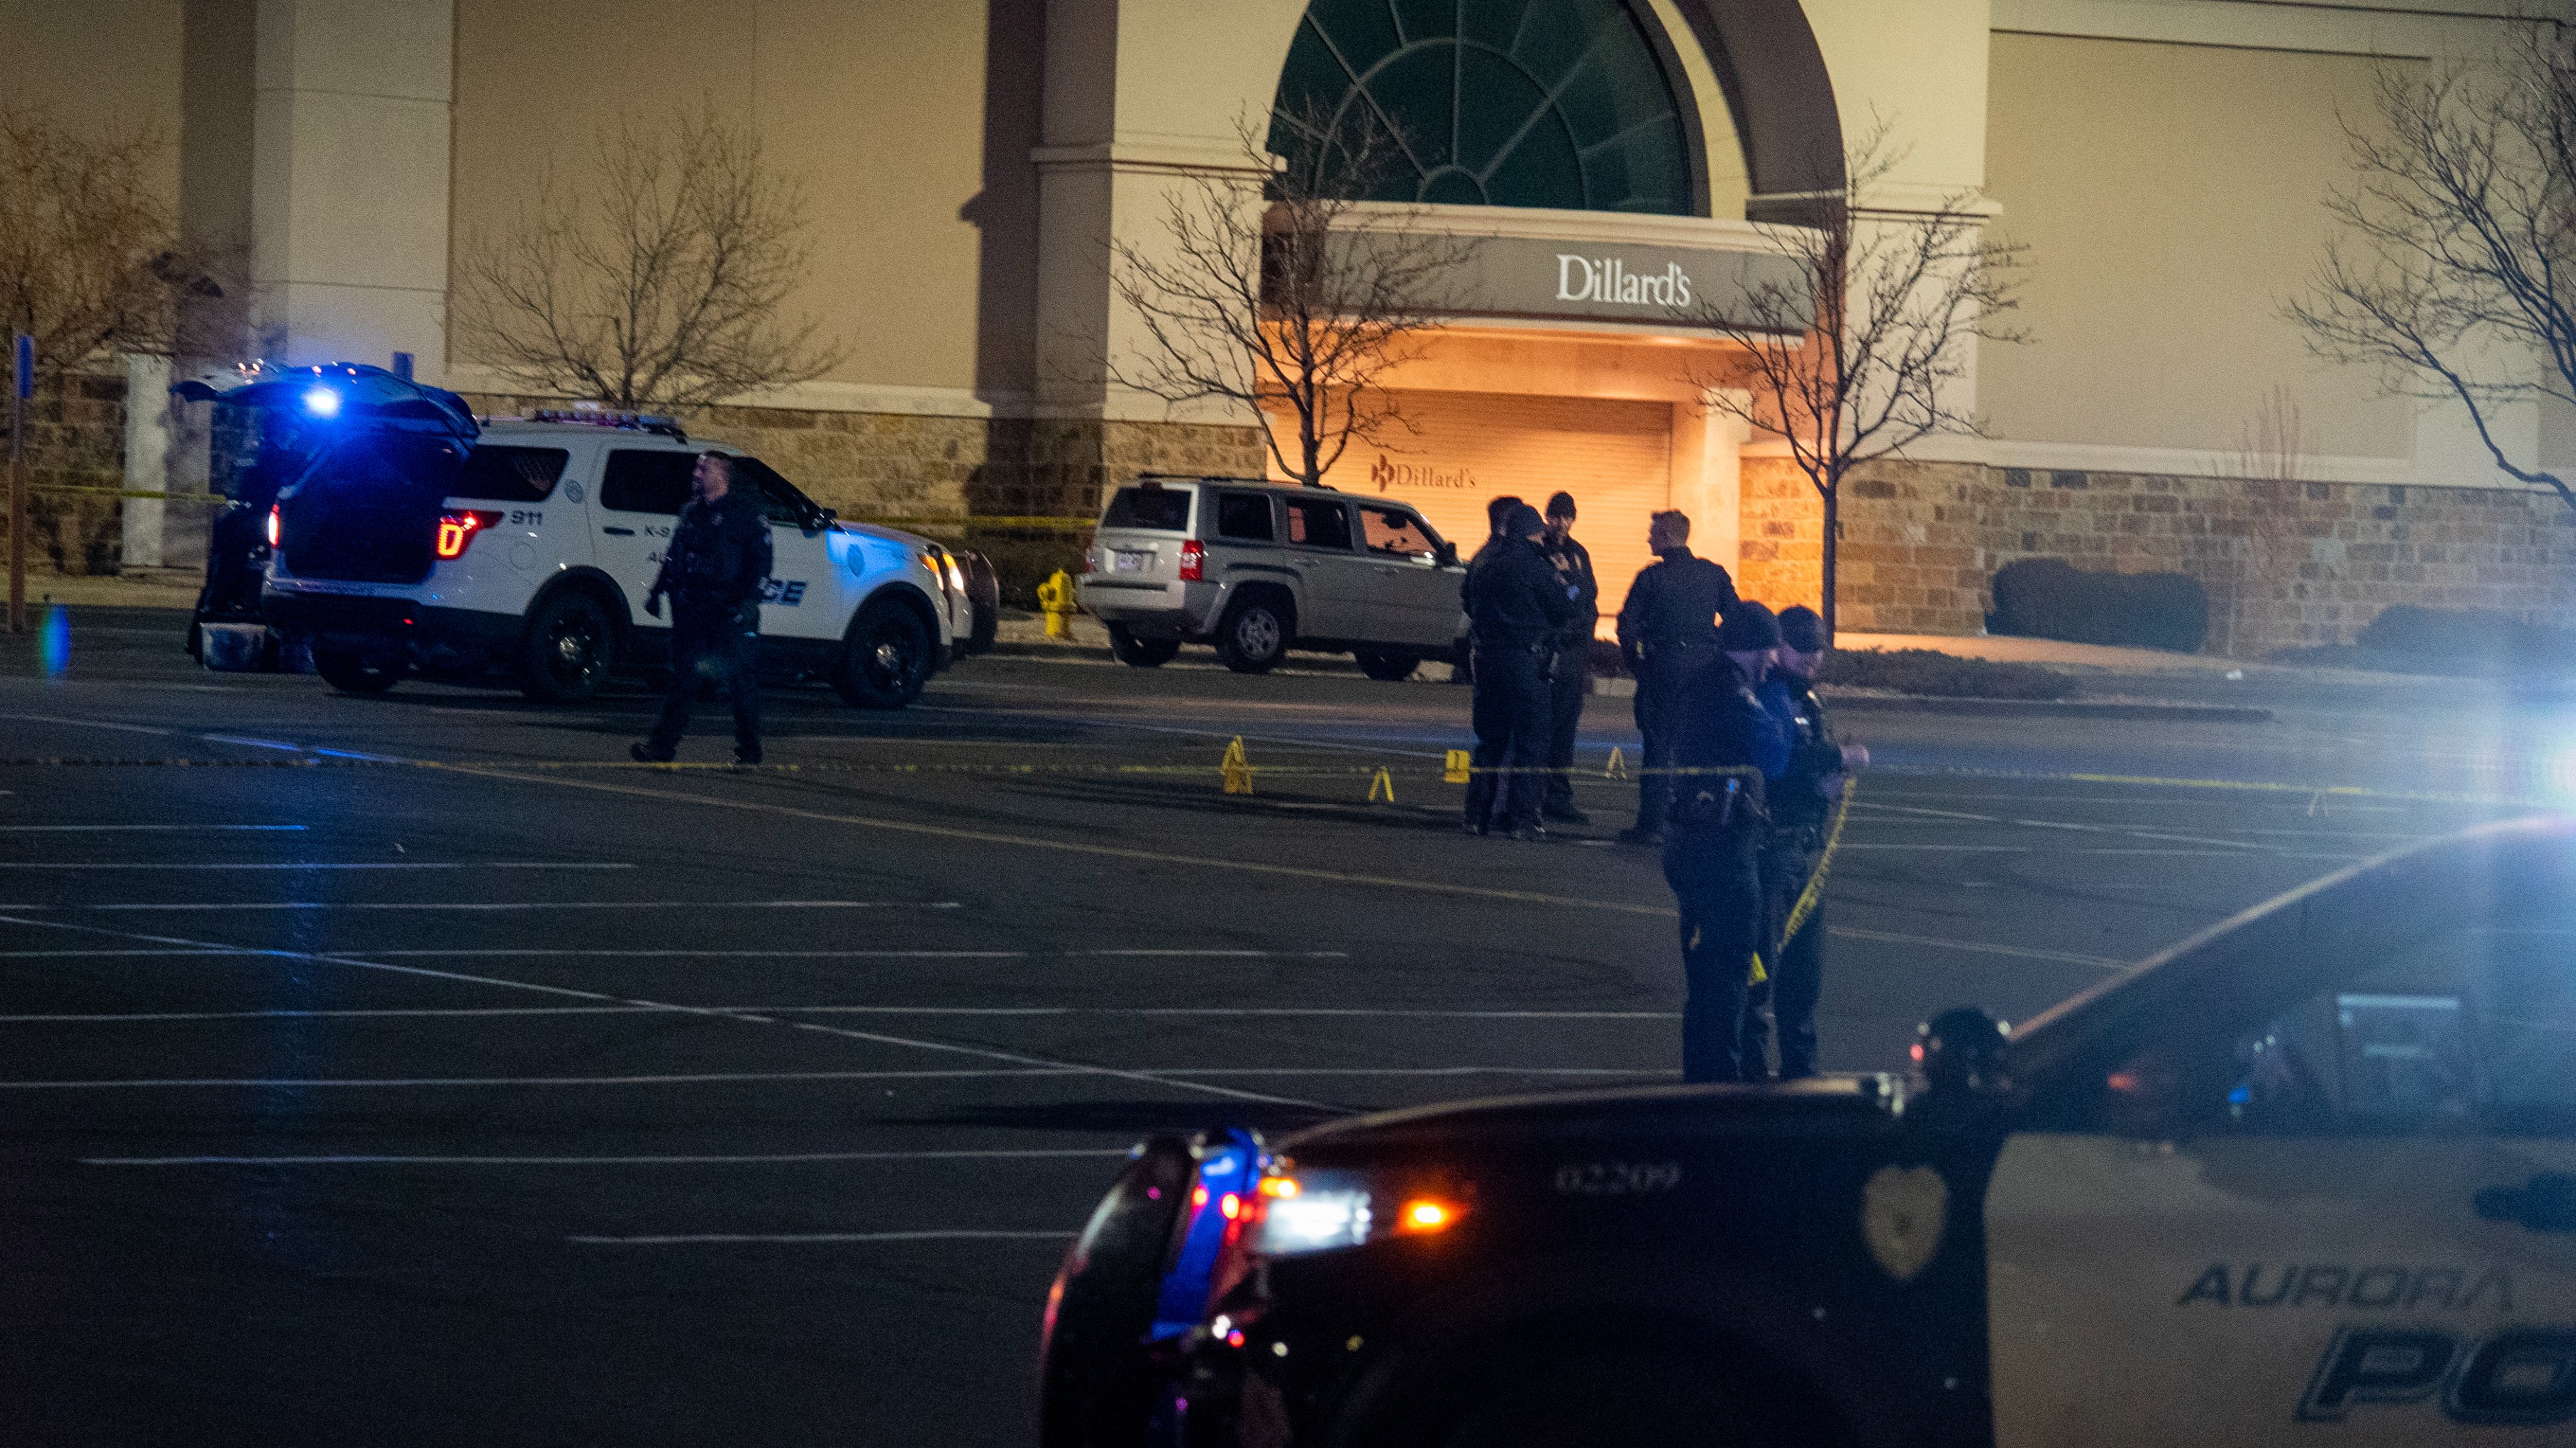 town center mall shooting